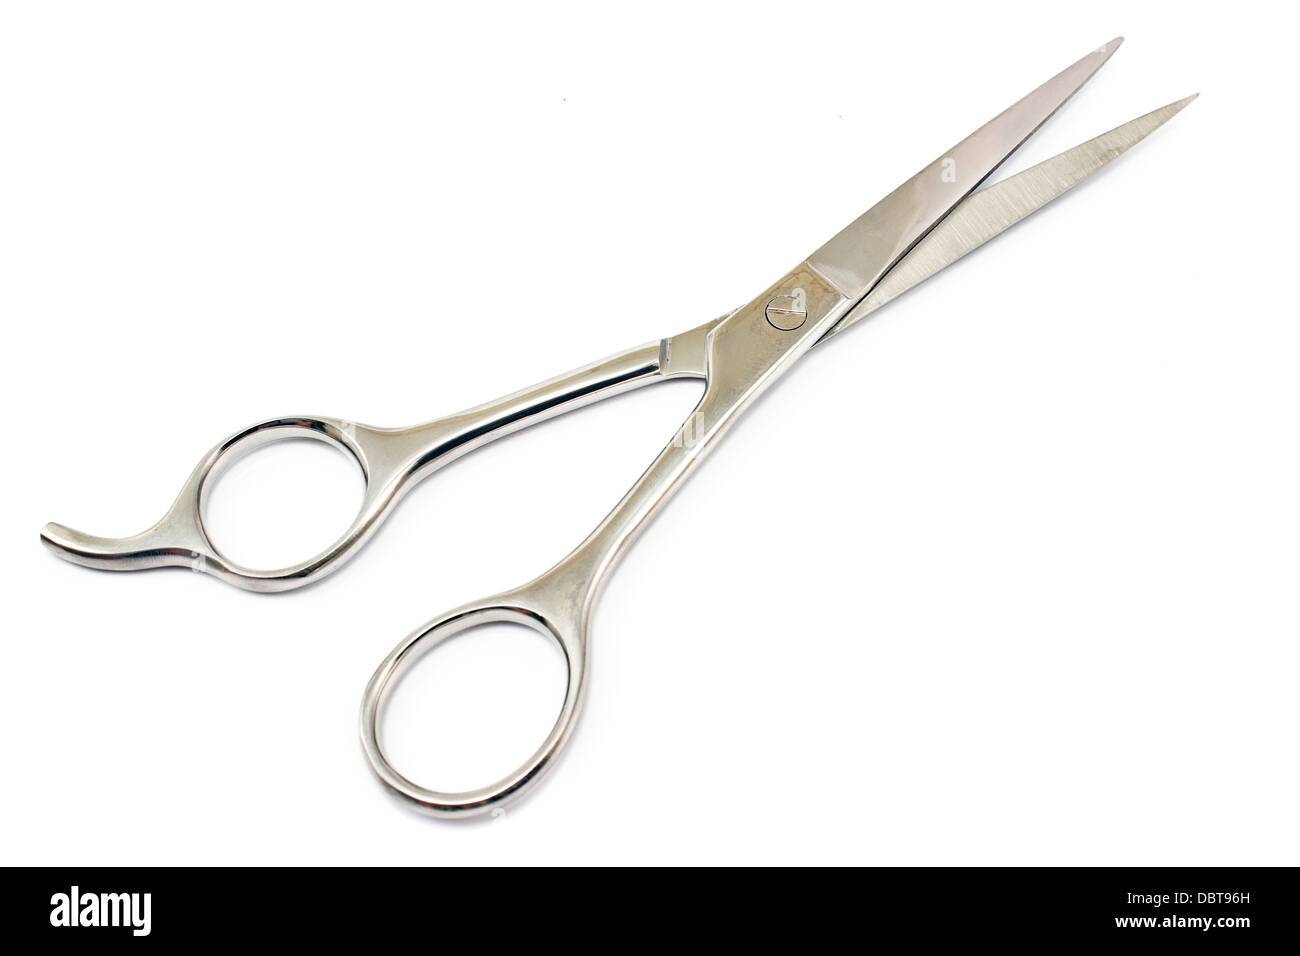 Professional haircutting scissors isolated on white. Stock Photo